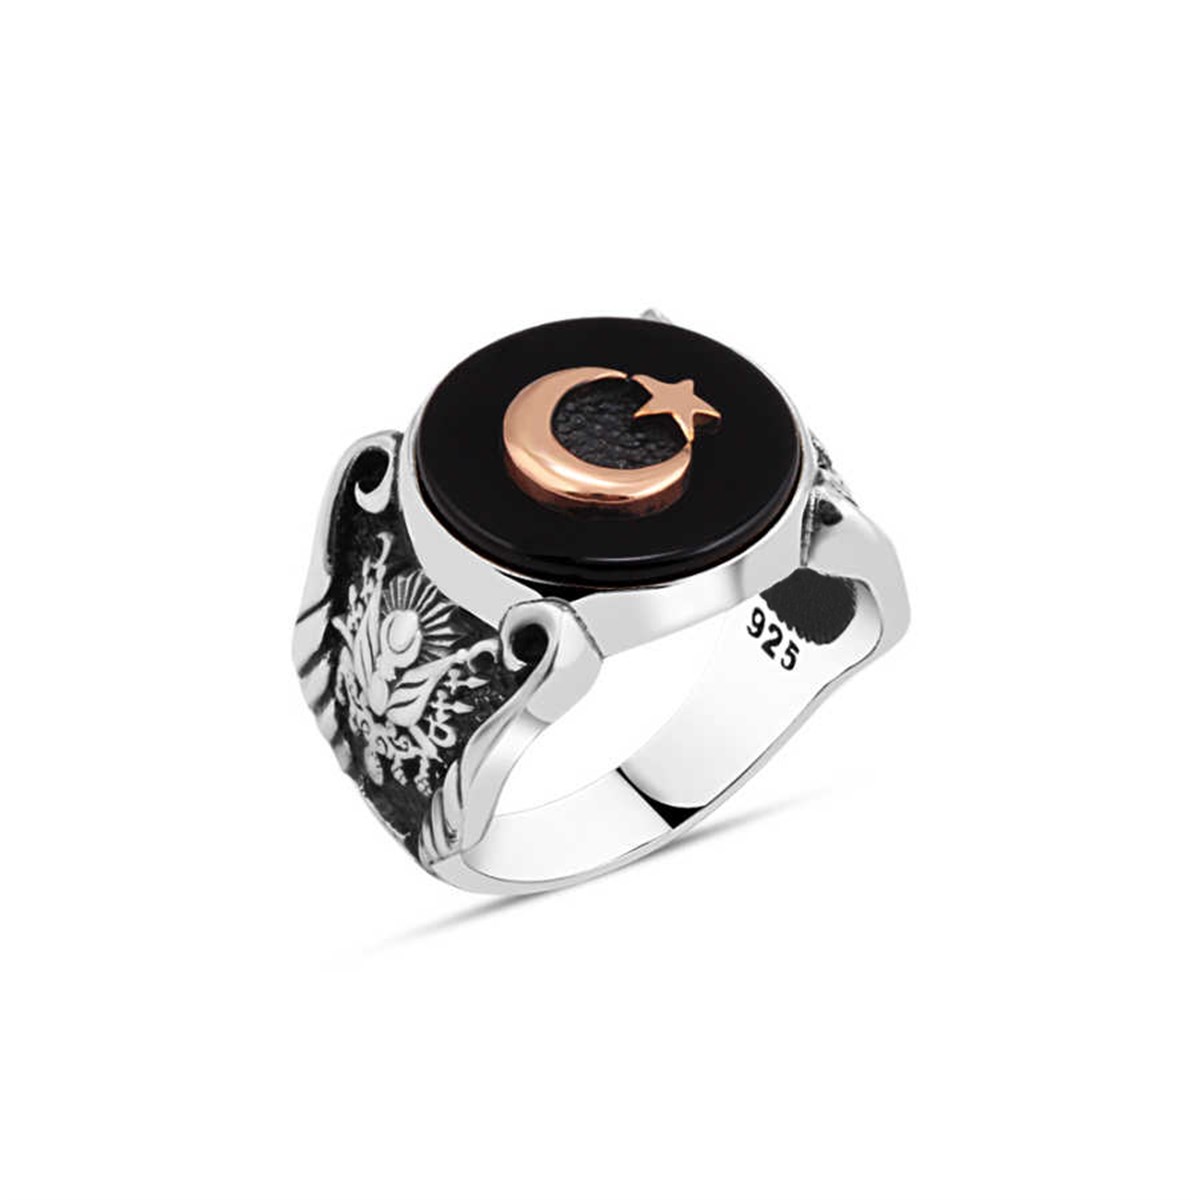 Star and Crescent on Onix Stone Sterling Silver Men's Ring